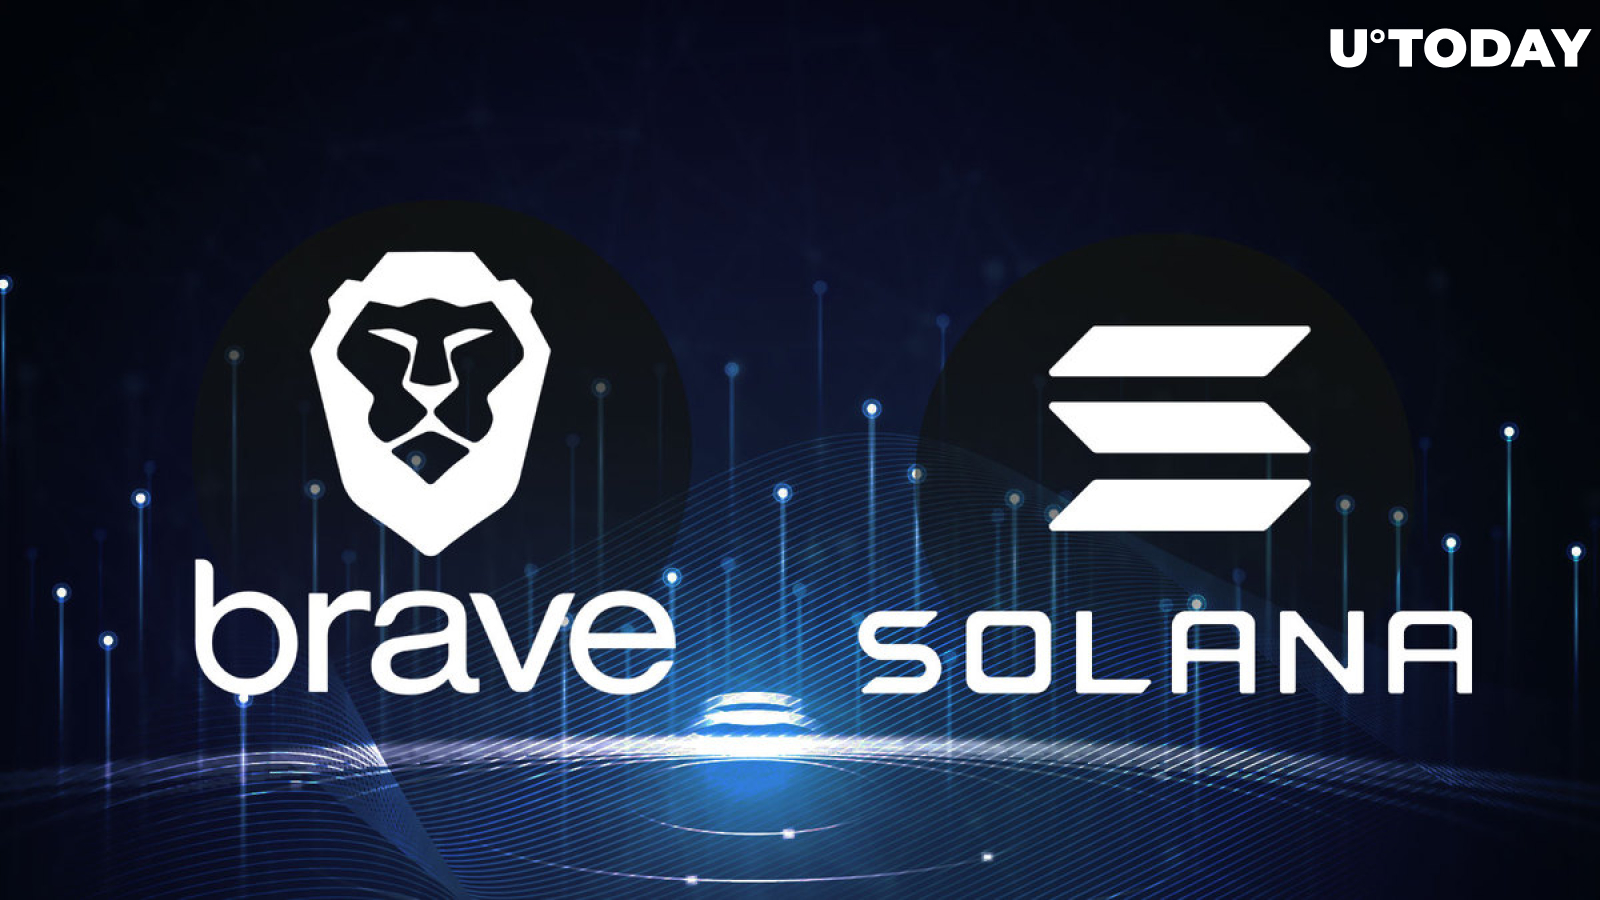 Solana (SOL) Scores New Integration With Brave Browser, Here's How This Can Boost Price